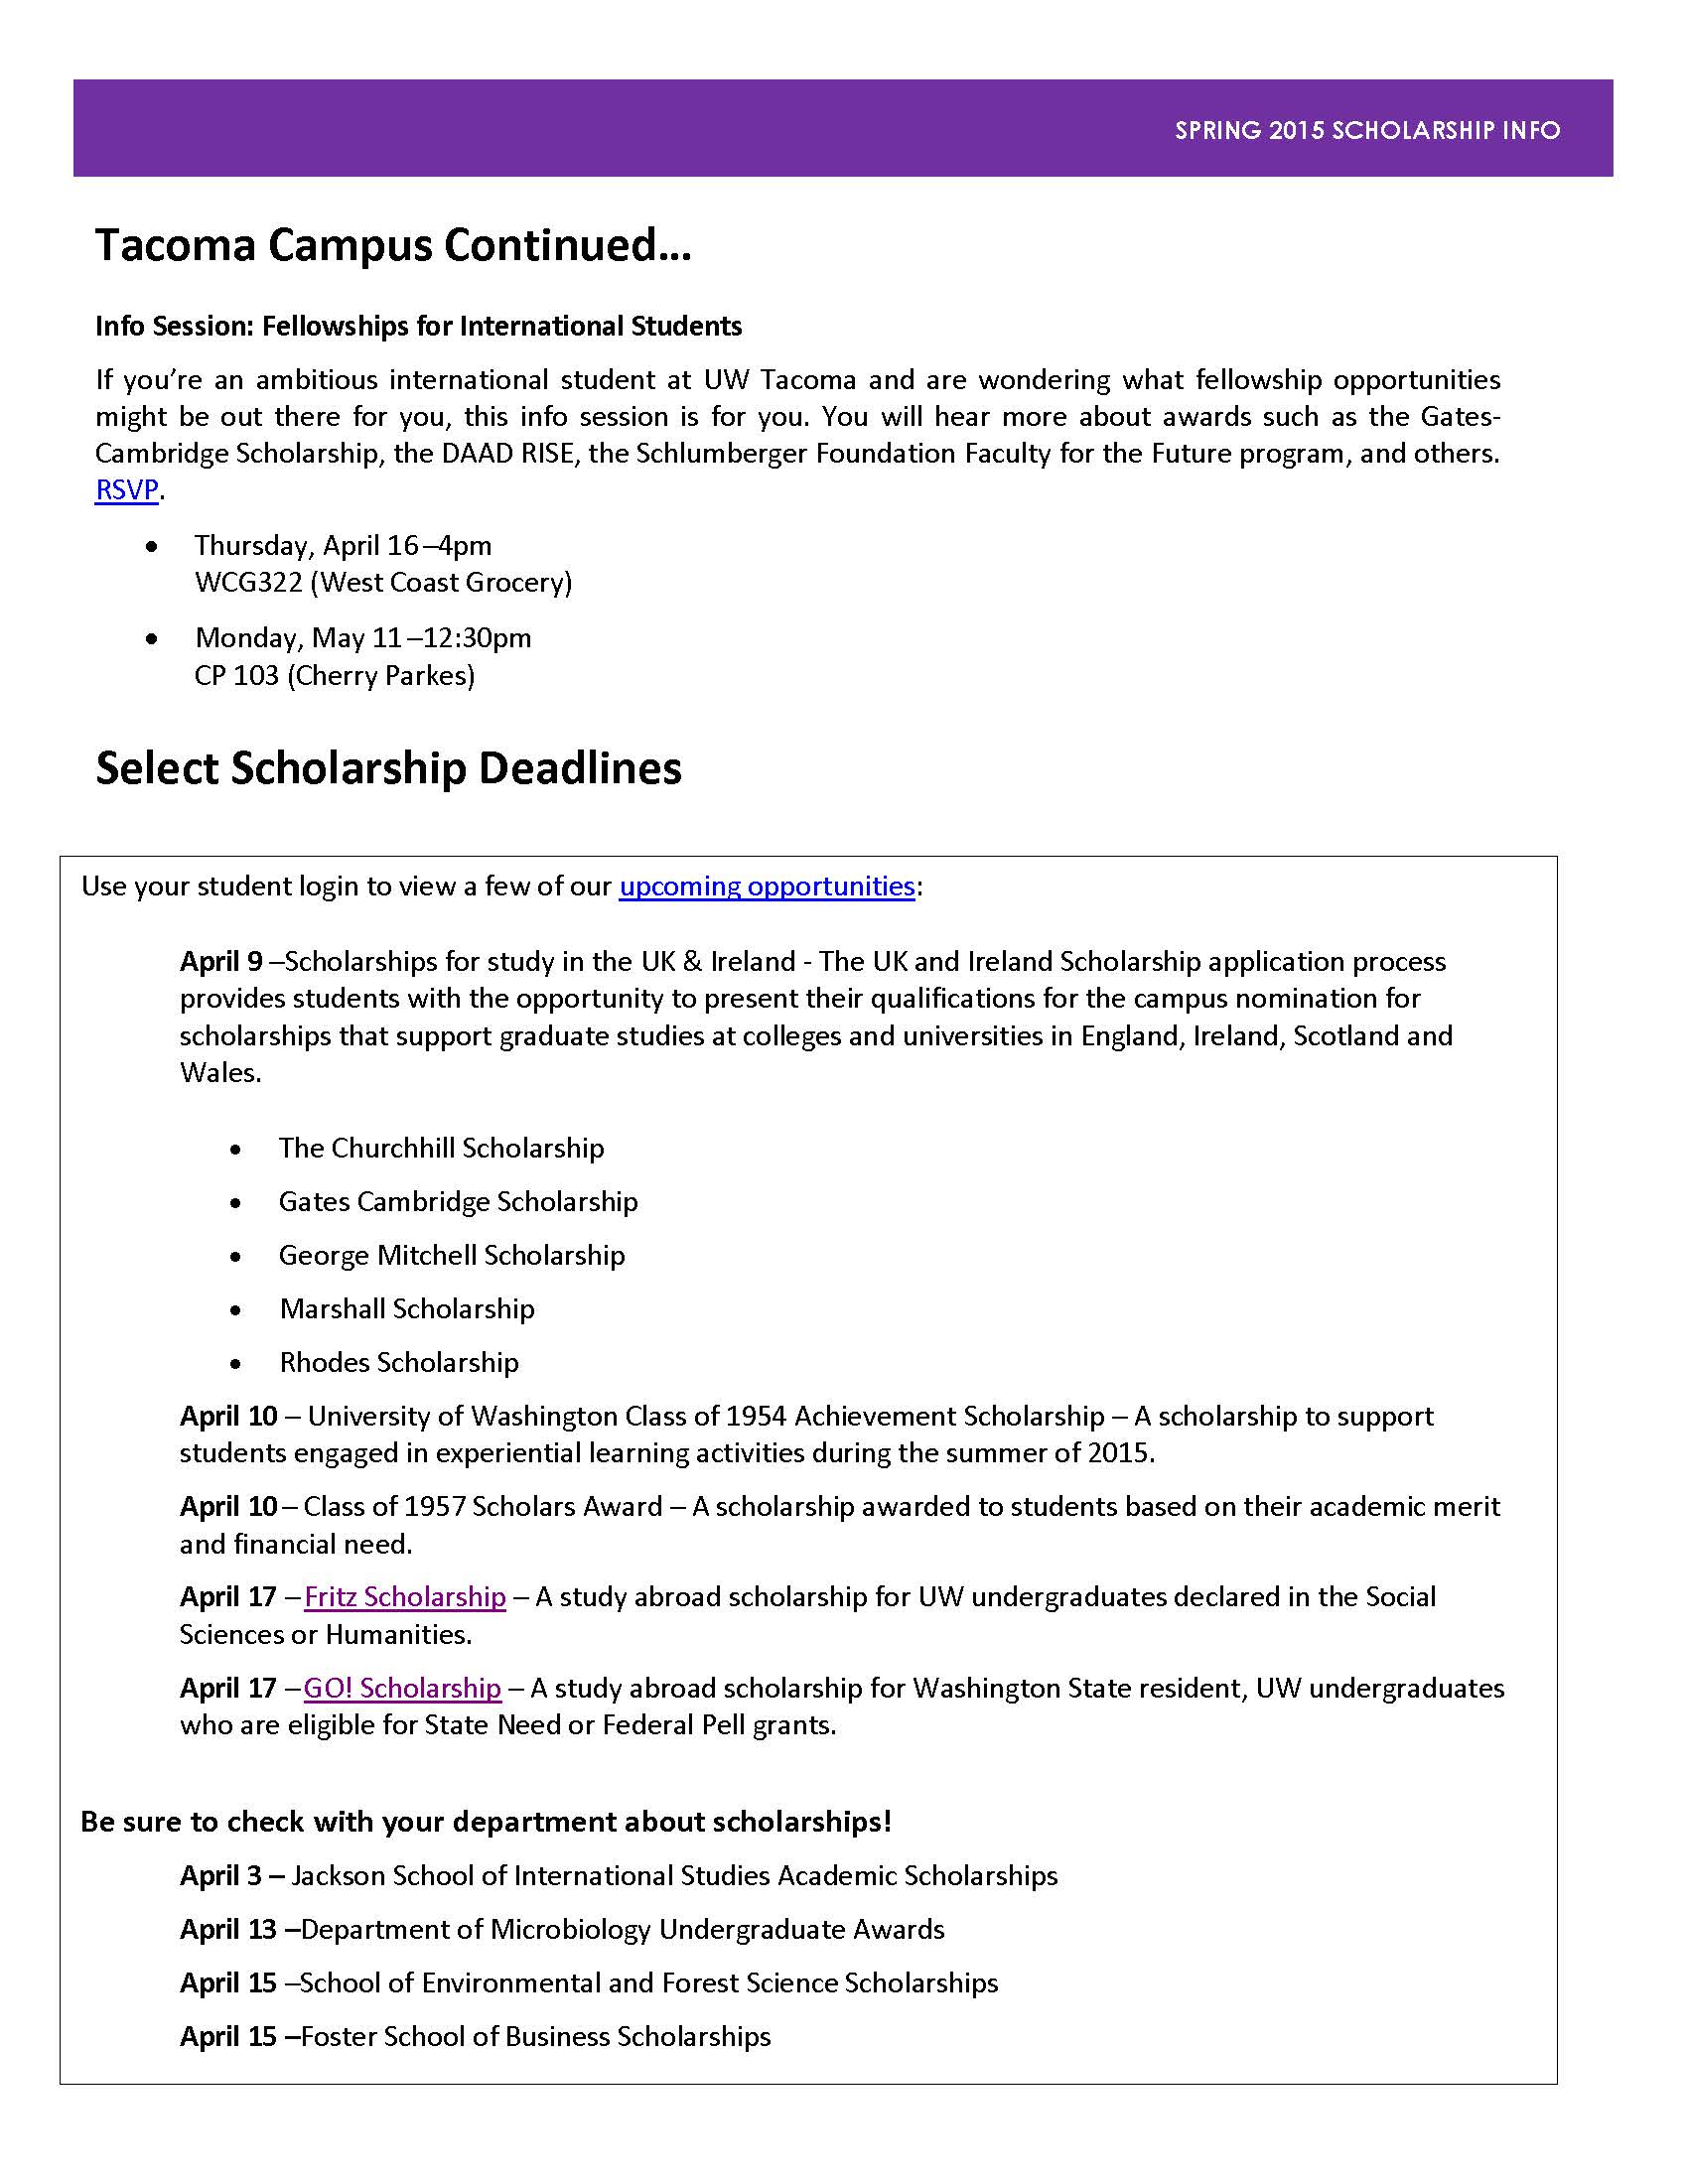 Scholarships with March 2015 deadlines